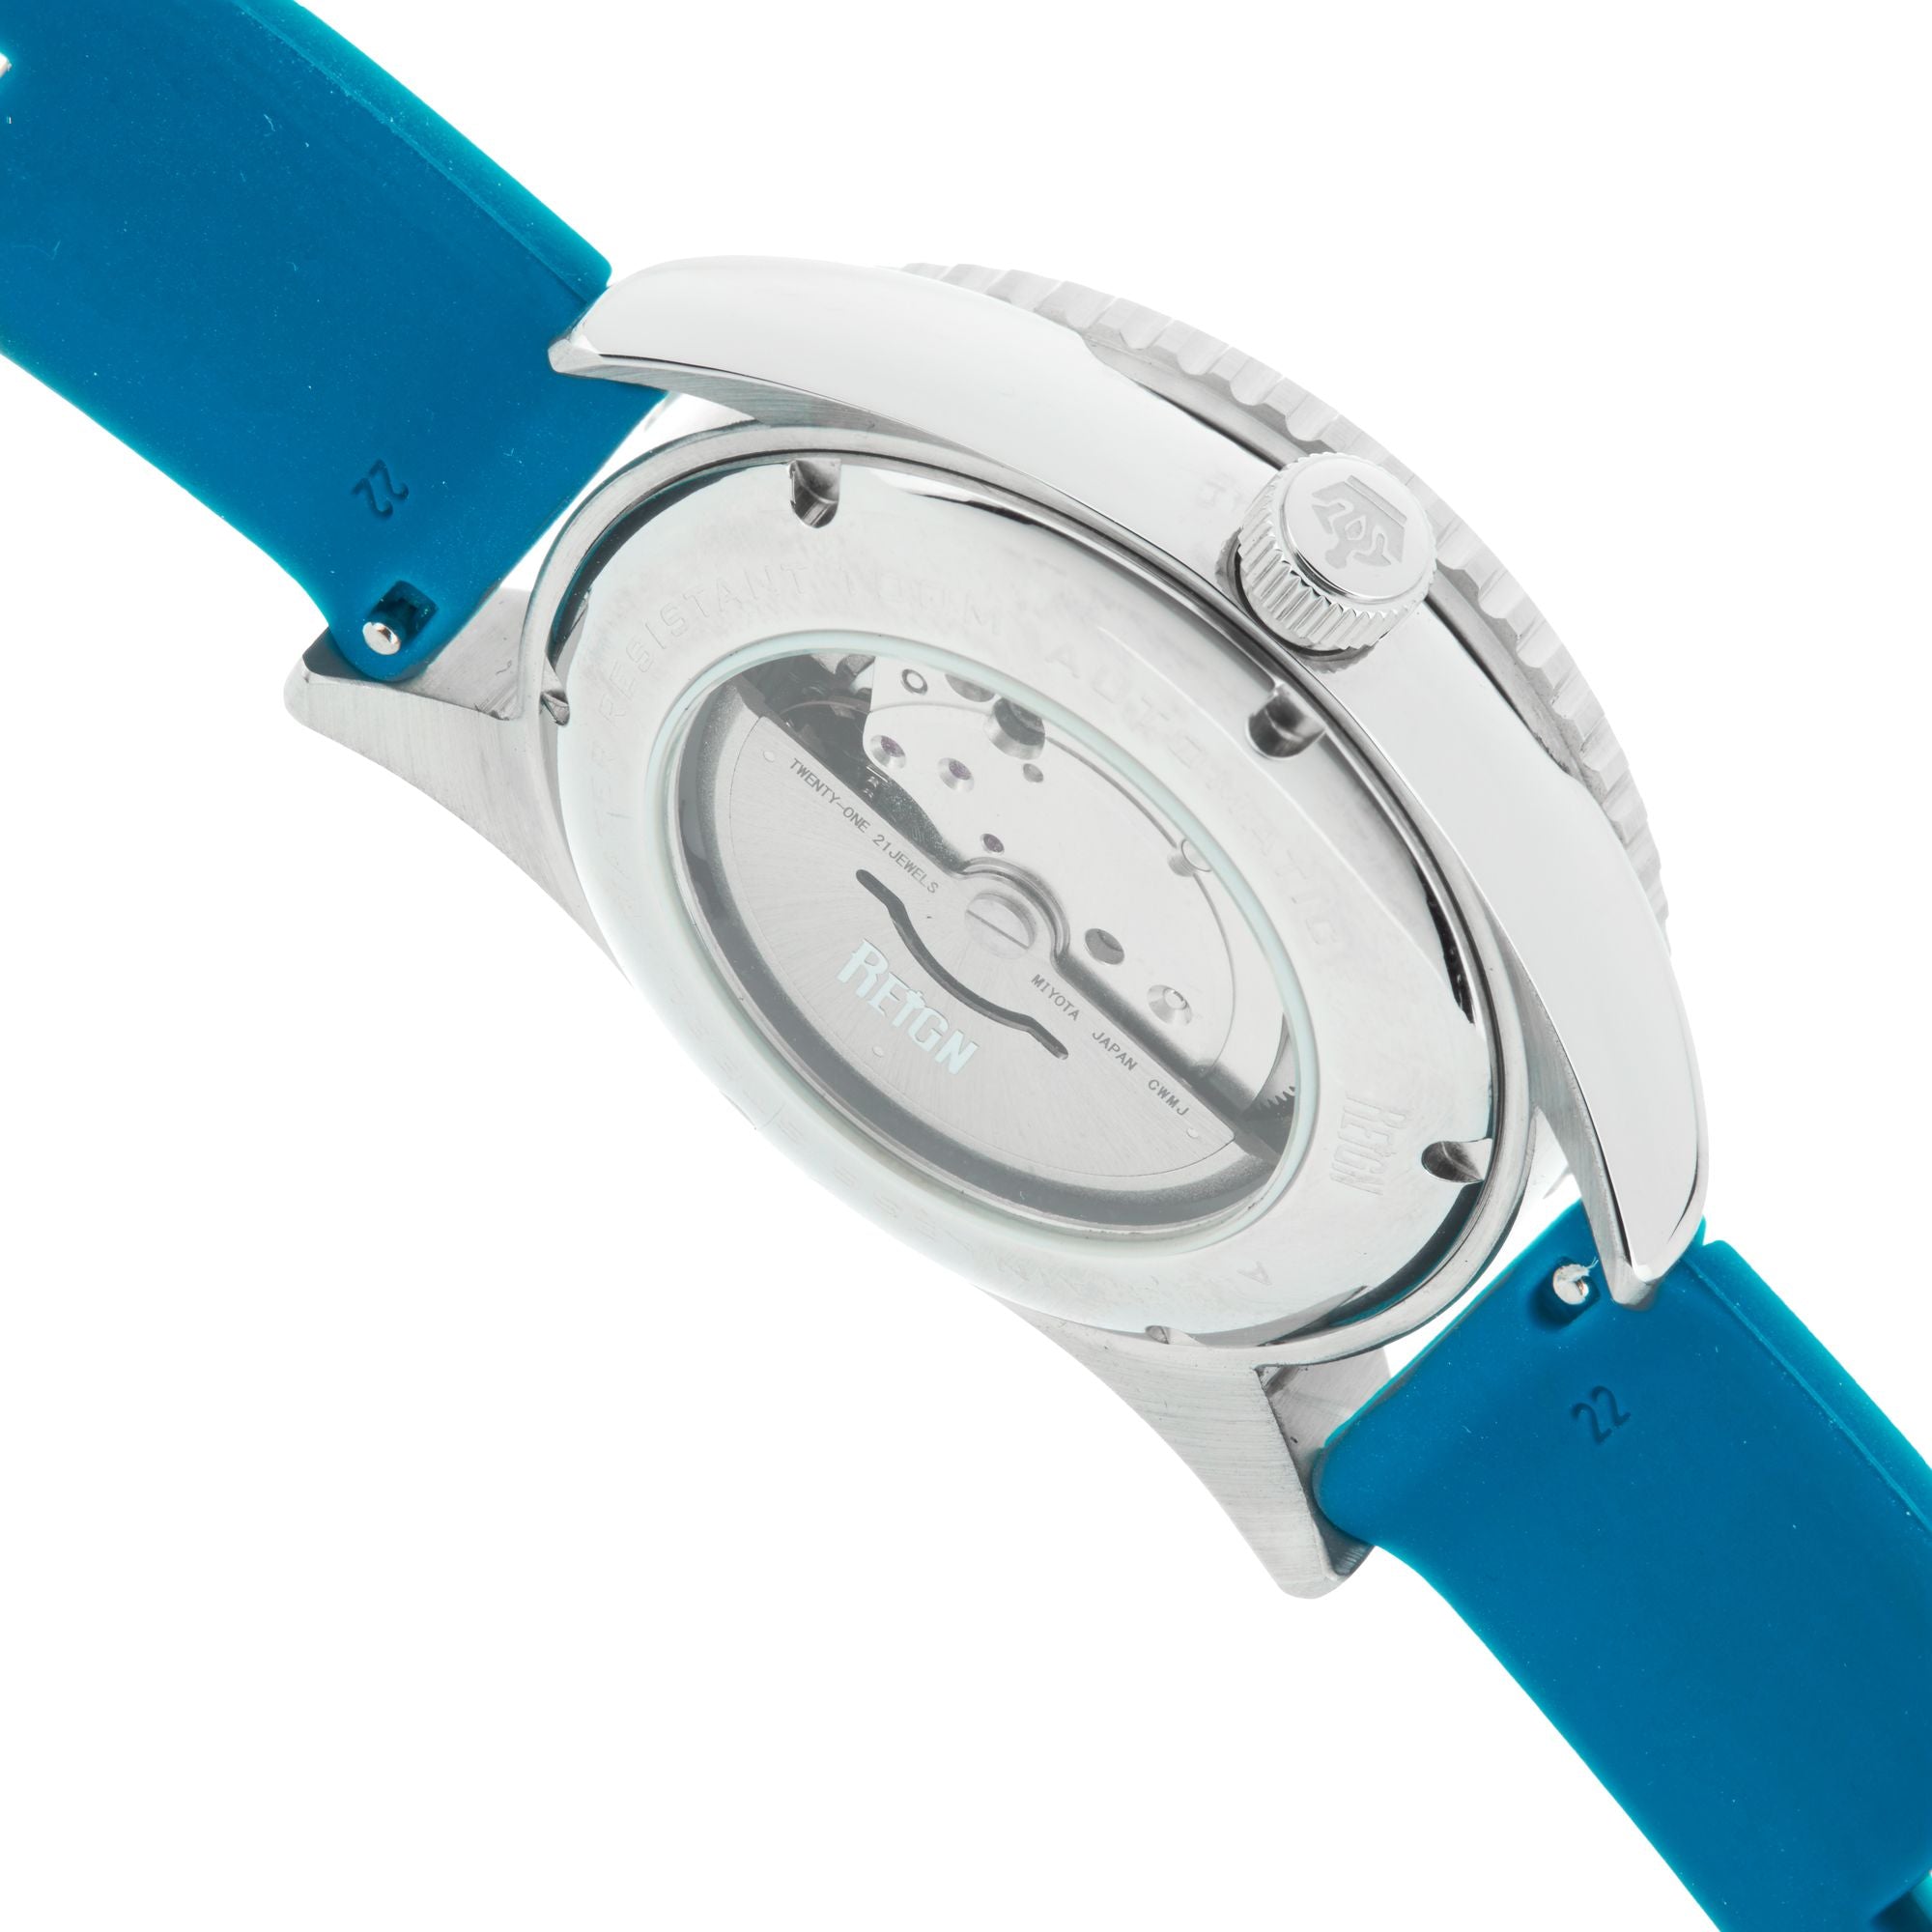 Reign Gage Automatic Watch w/Date - Blue - REIRN6604